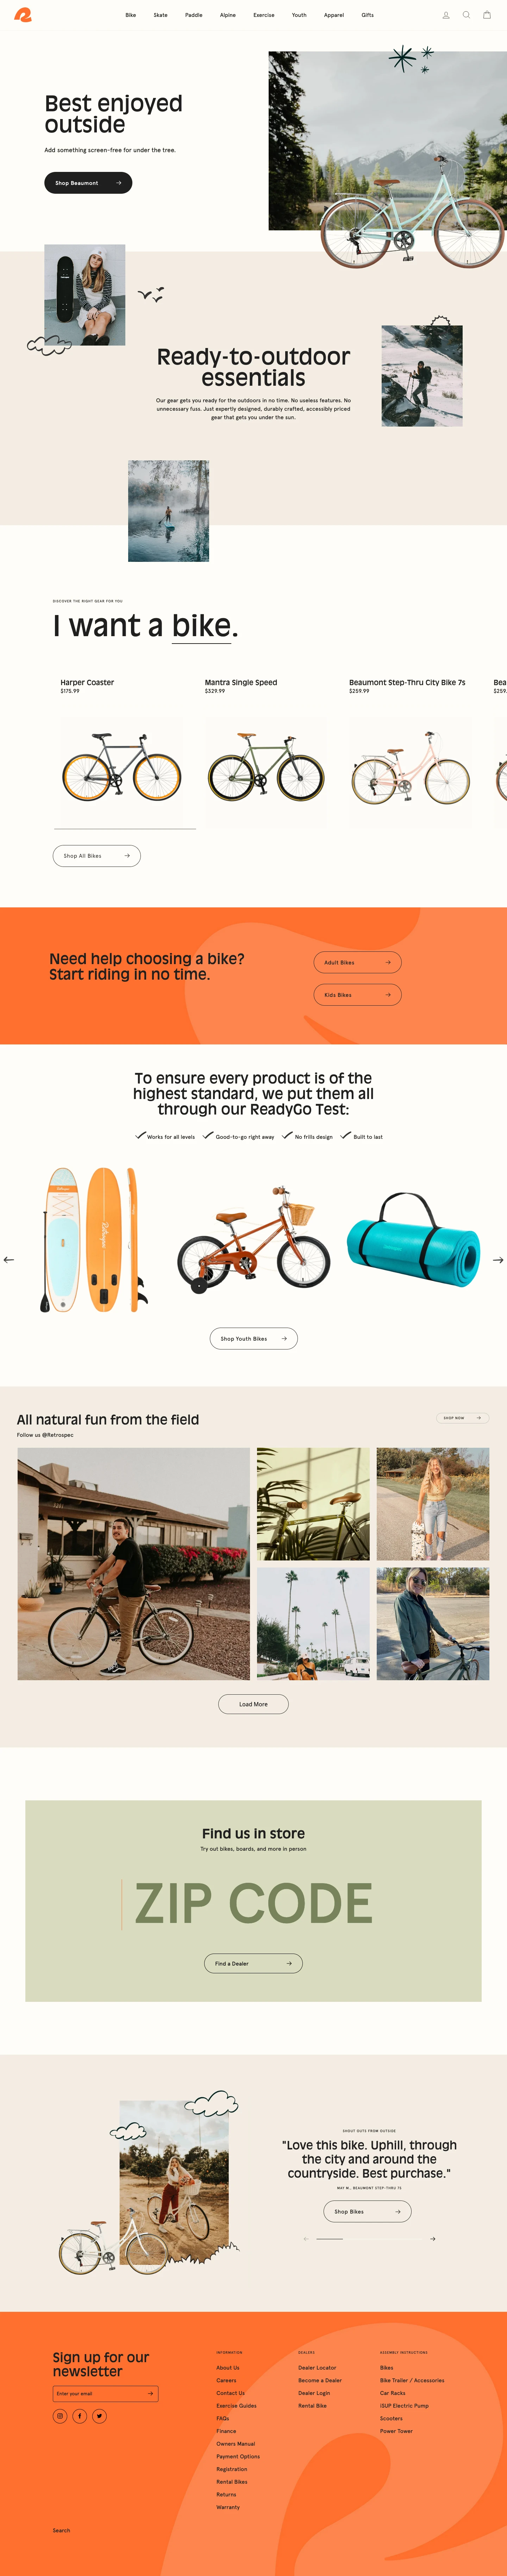 Retrospec Landing Page Example: Where outside comes naturally. The outside is for everyone, but not everyone feels comfortable outside. So we set out to make everyone feel at-home in the open-air. Shop ready-to-outdoor essentials for every season.